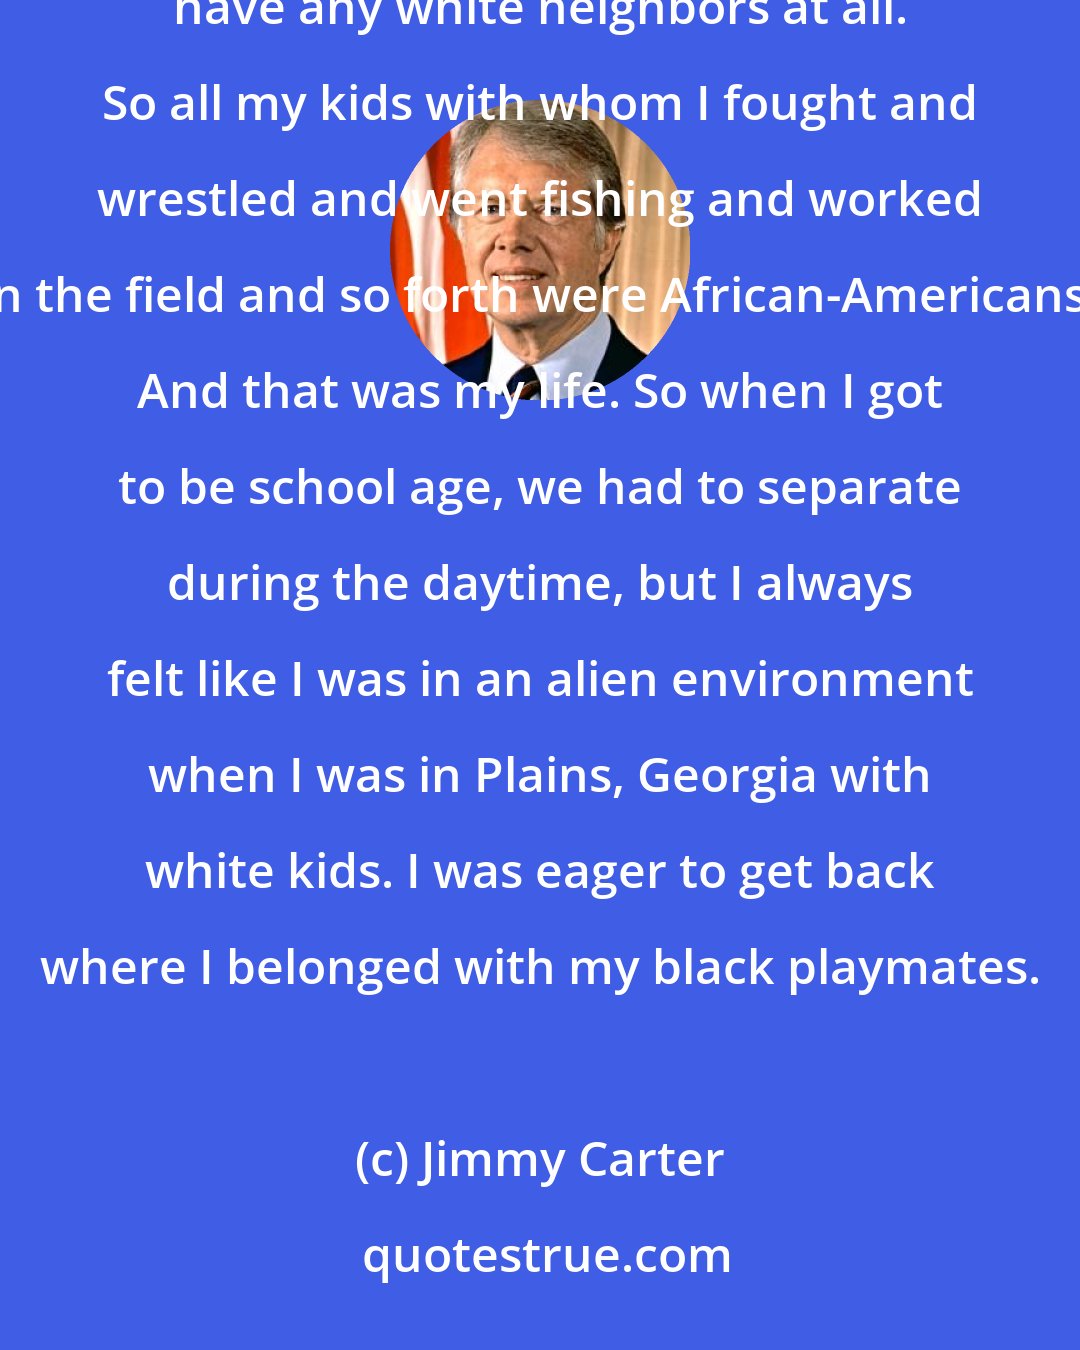 Jimmy Carter: All my playmates were black. I lived in a little community called Archery (ph) in a rural area. And I didn't have any white neighbors at all. So all my kids with whom I fought and wrestled and went fishing and worked in the field and so forth were African-Americans. And that was my life. So when I got to be school age, we had to separate during the daytime, but I always felt like I was in an alien environment when I was in Plains, Georgia with white kids. I was eager to get back where I belonged with my black playmates.